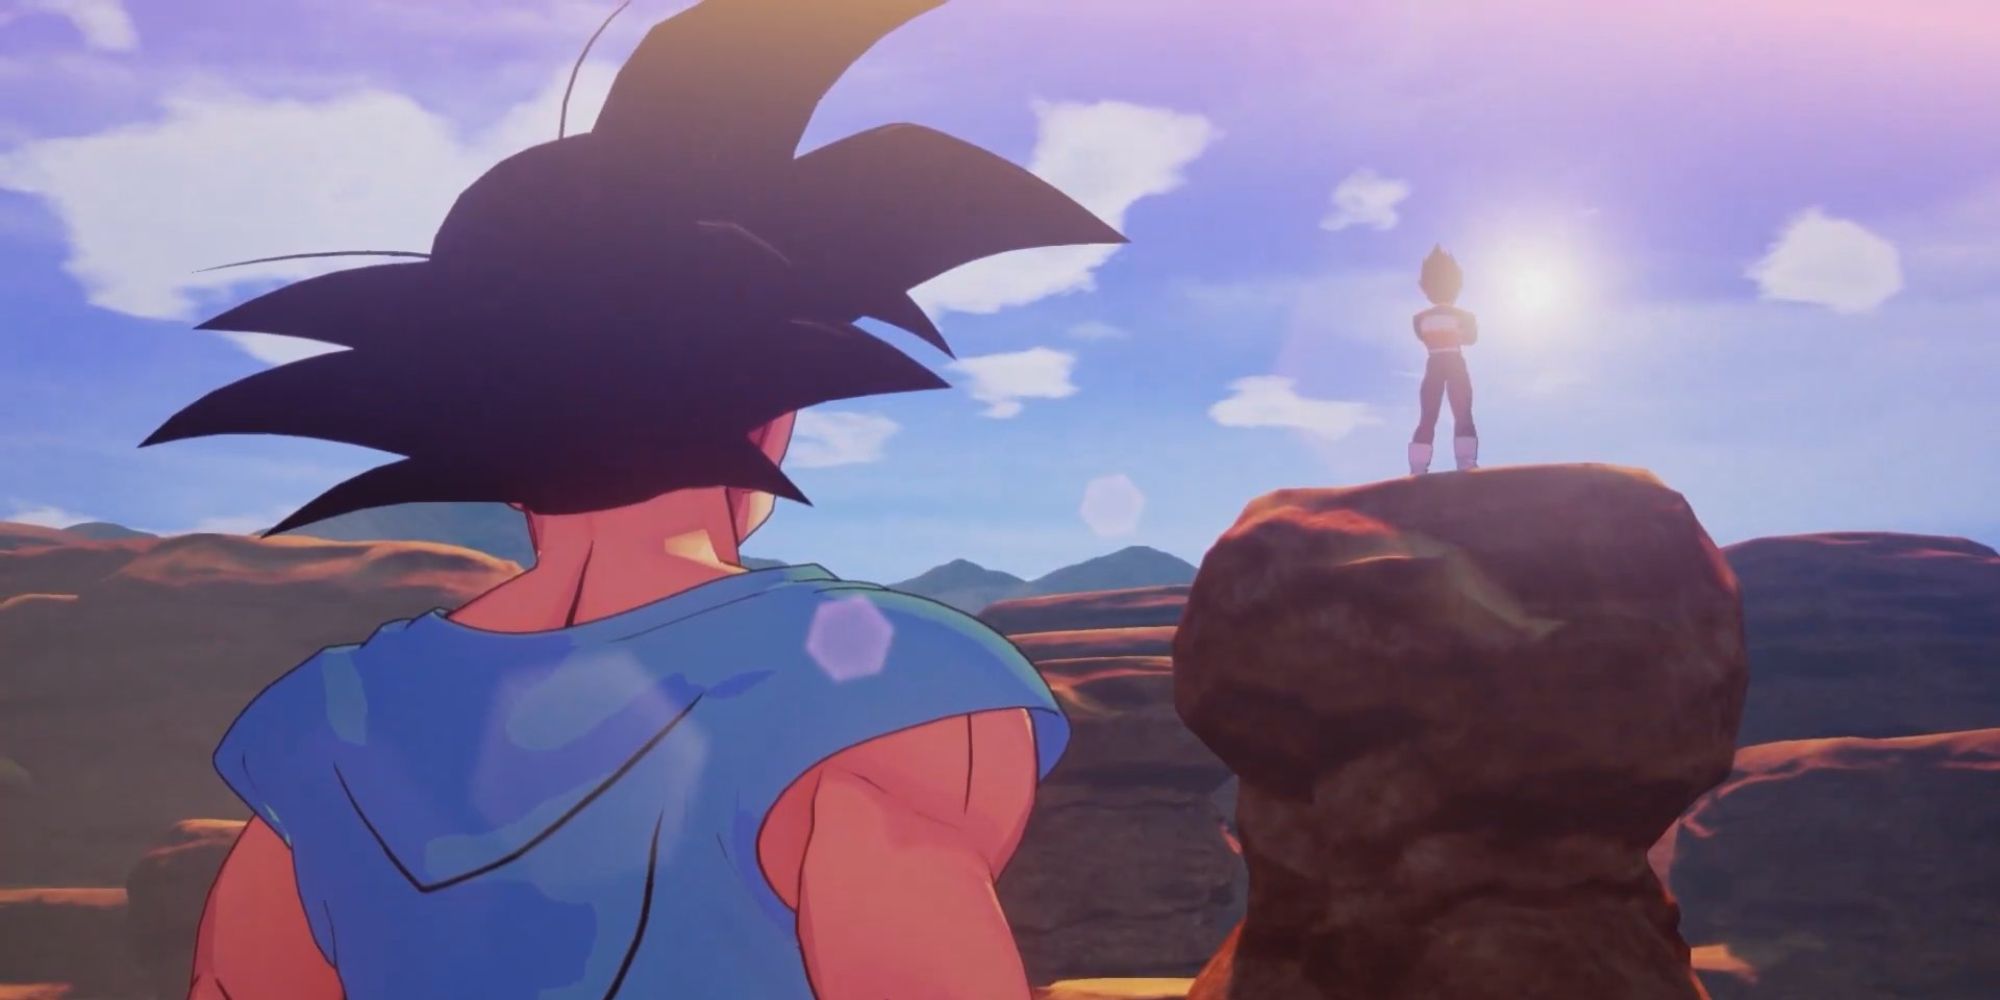 Goku and Vegeta about to have a rematch in Dragon Ball Z: Kakarot.